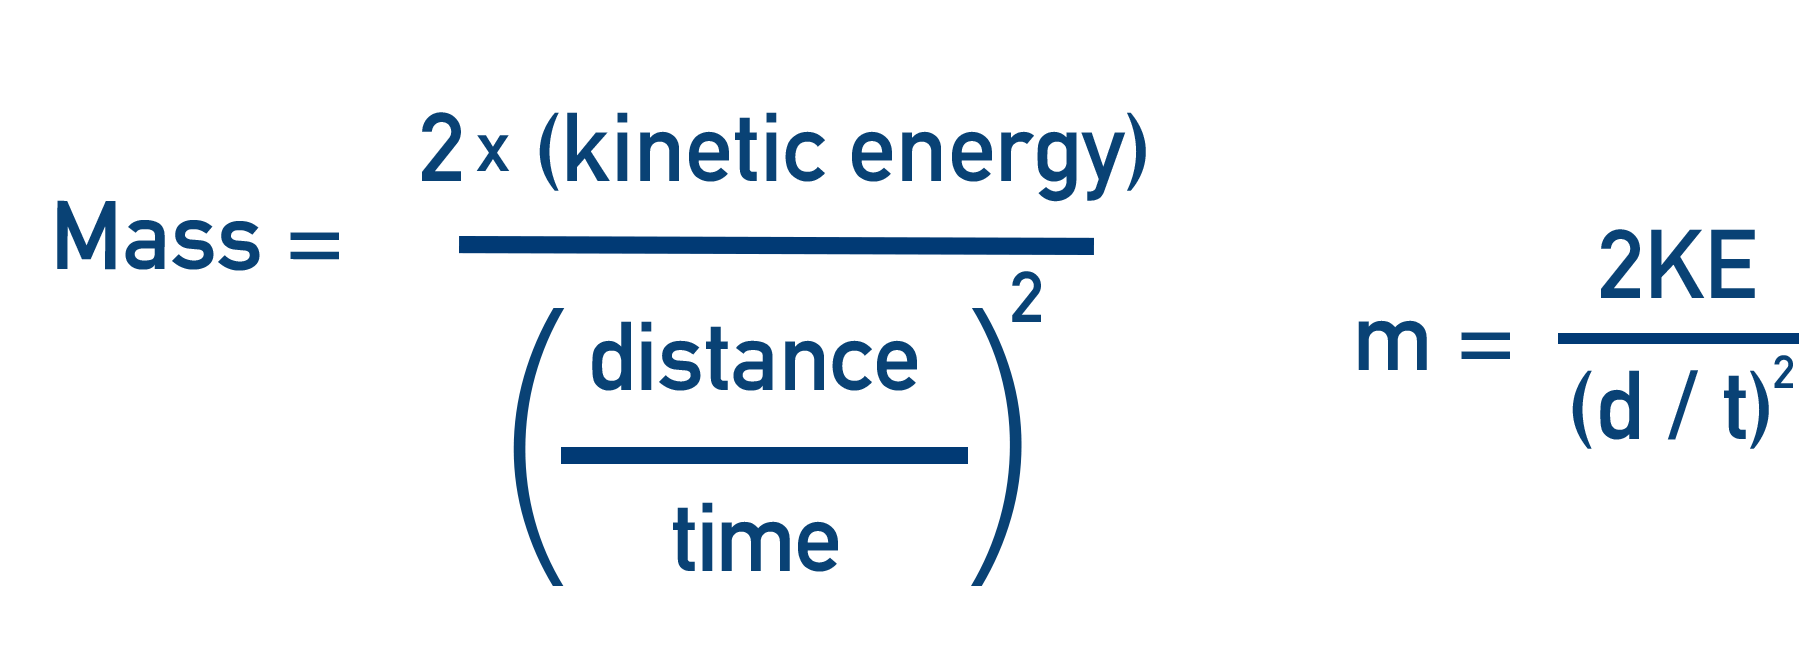 Mass equation for time of flight mass spectrometry